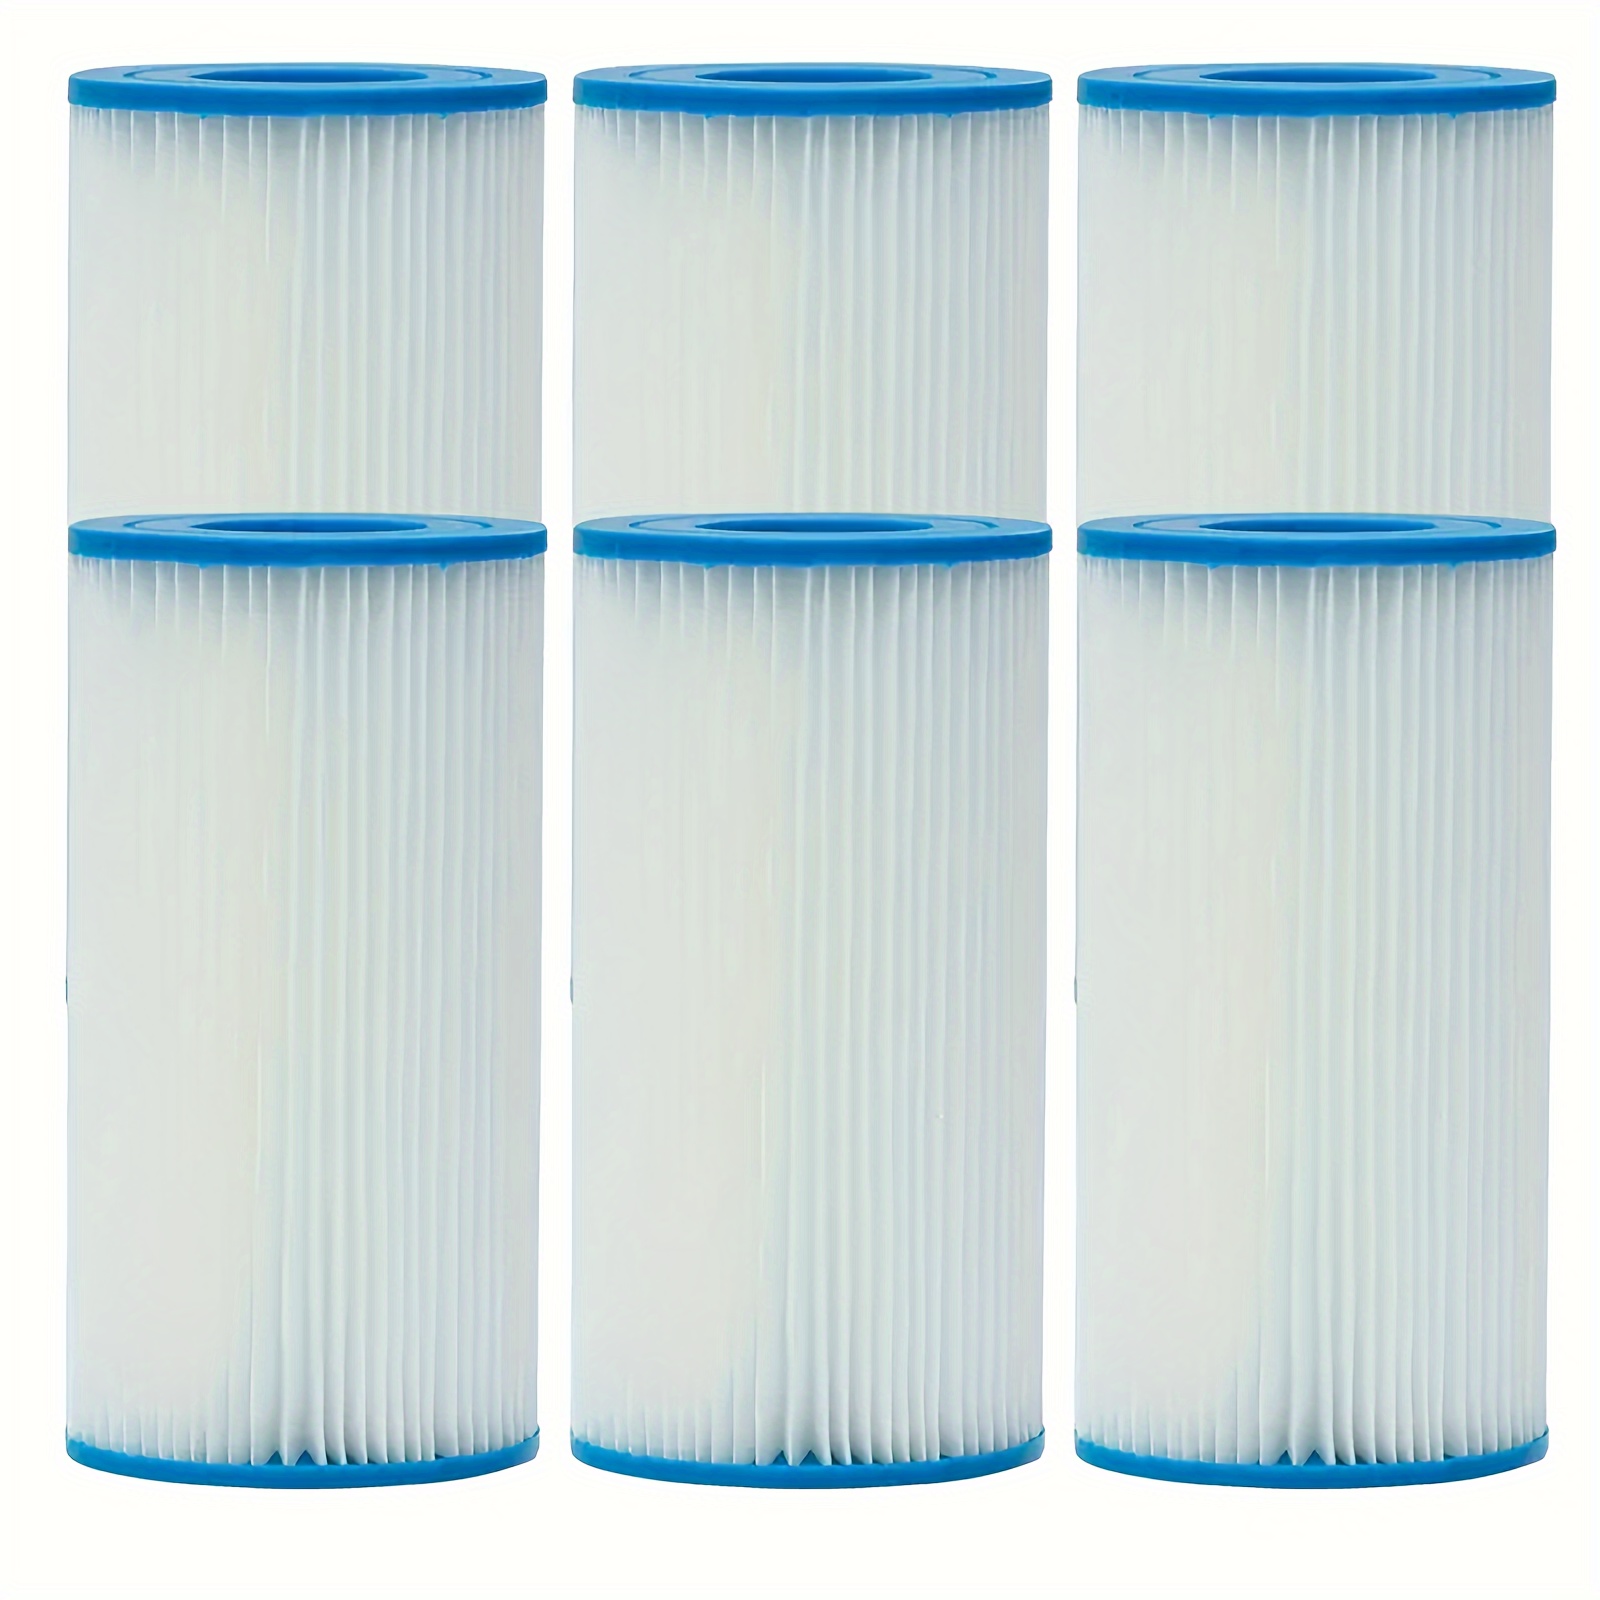 

4/6pcs, Pool Filter Cartridge Type Iii, Compatible With Krystal Clear 530/1000 Gph Pool Pump And More, Easy Set Replacement Cartridge, For Outdoor Garden Pool Supplies 8in Height X 4.2in Diameter